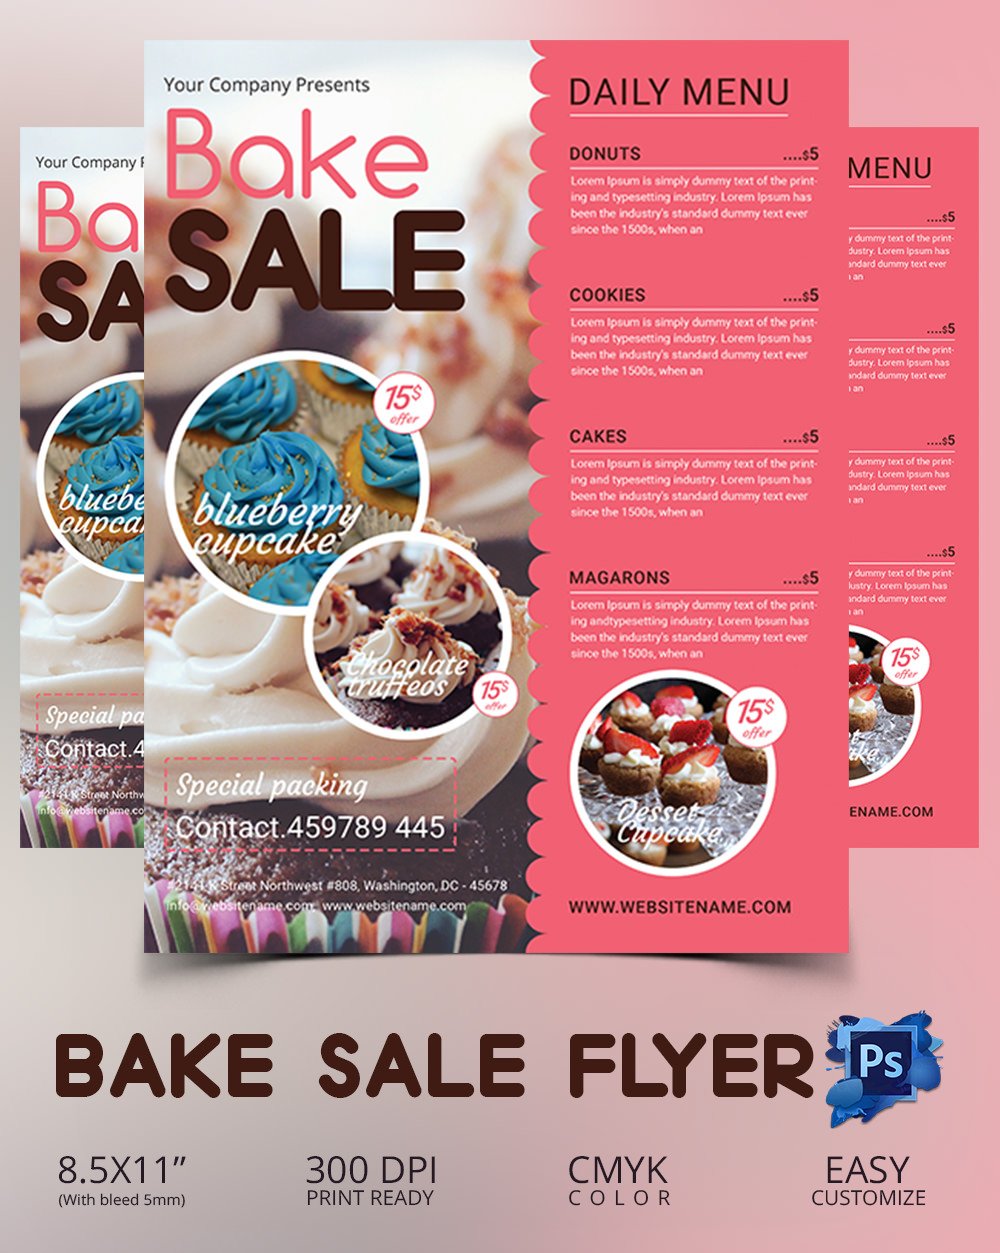 Bake Sale Flyer Template 34 Free PSD Indesign AI Format Download Free Premium Templates